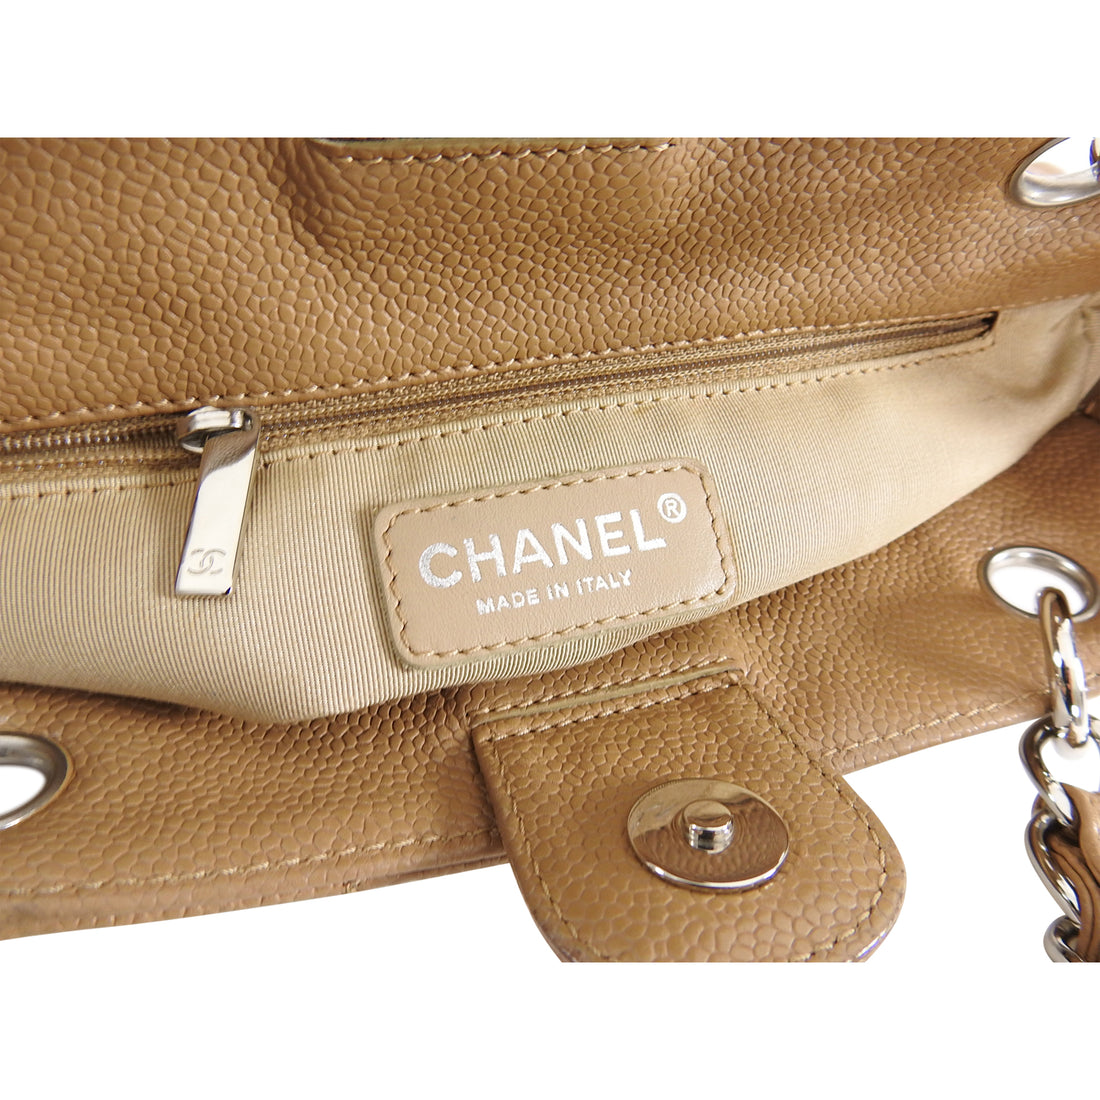 CHANEL PST Bags & Handbags for Women, Authenticity Guaranteed